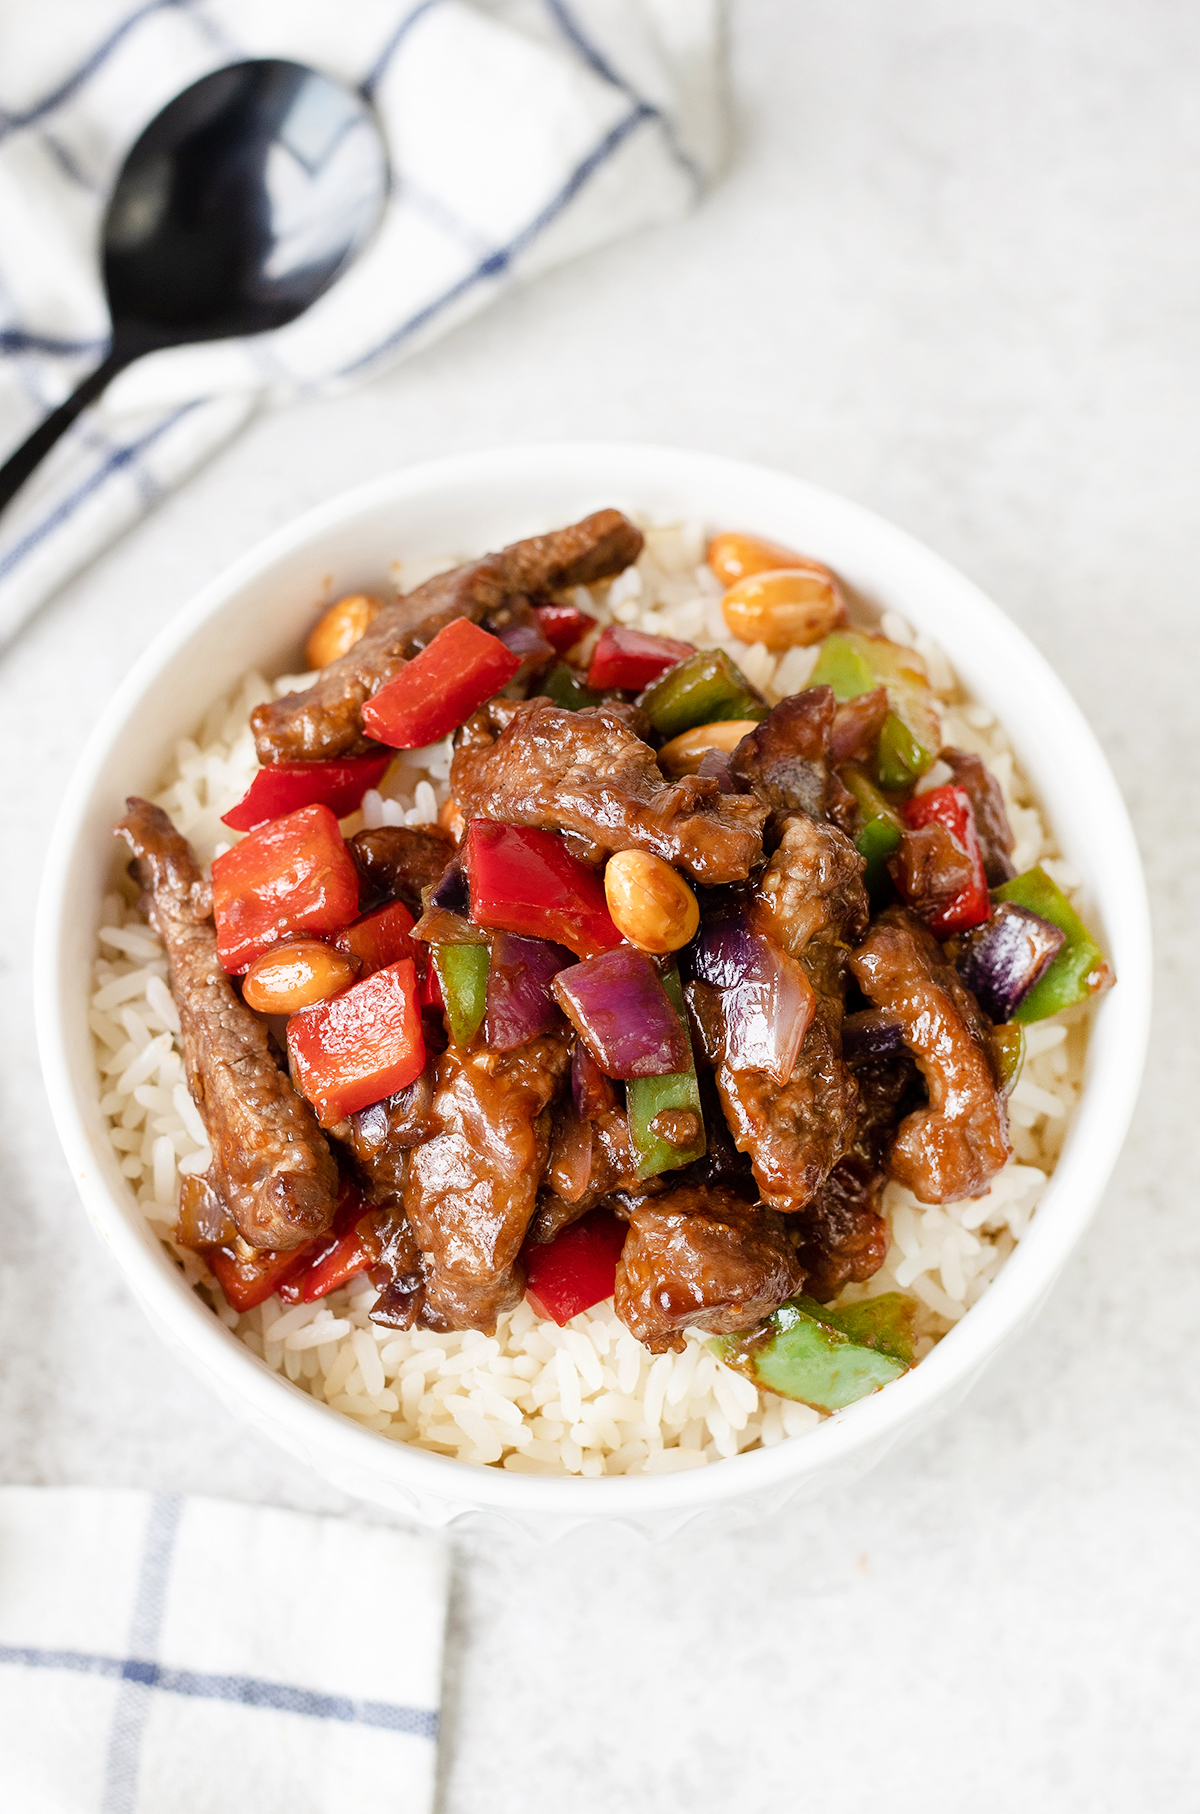 Kung Pao Beef is a Chinese stir fry dish